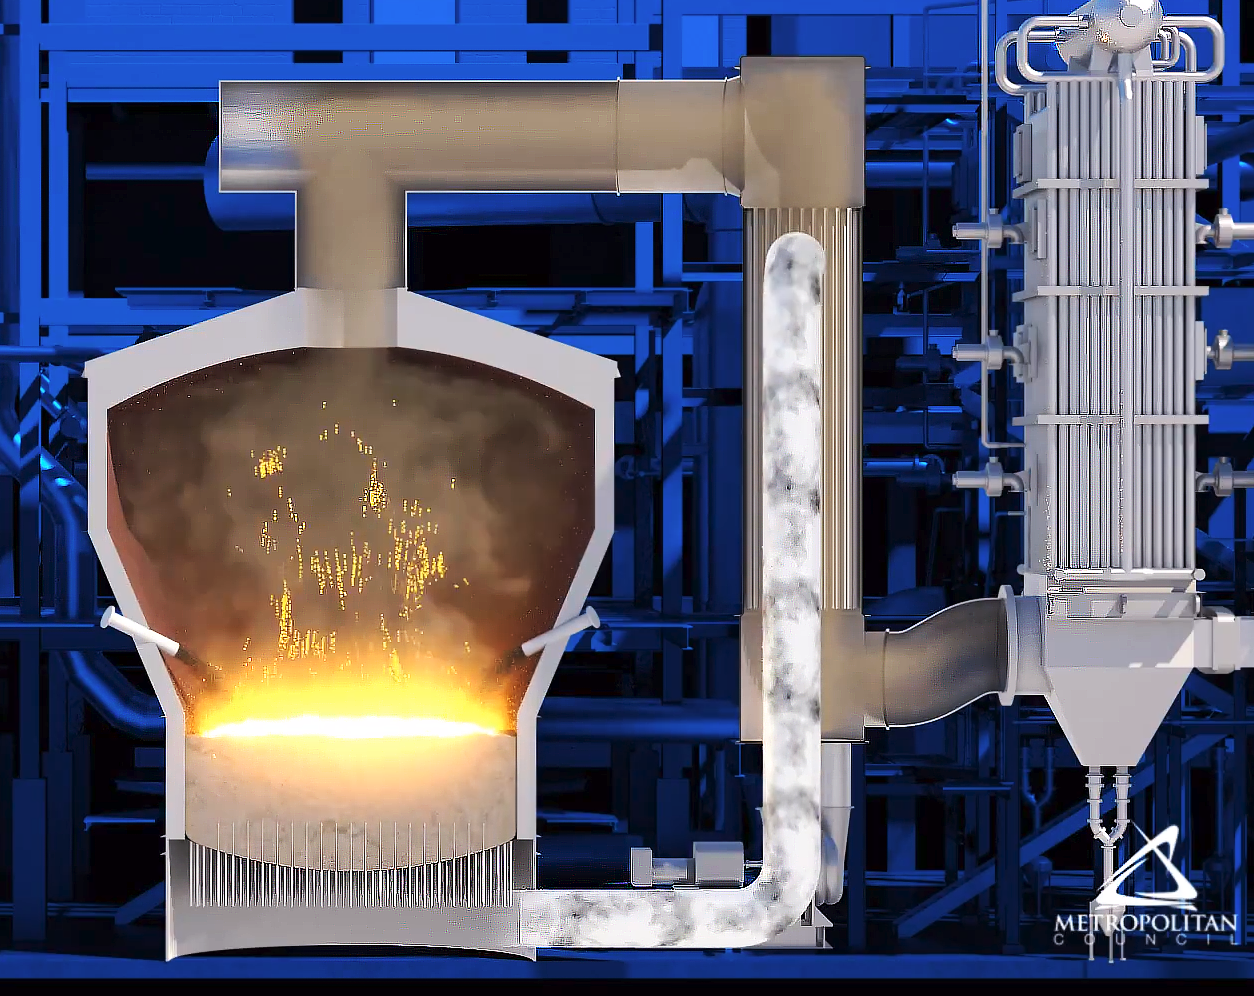 This is a 3D rendered image of the explainer video close up cross-section view of the fluid incinerator displays everything that is occurring inside of the machine. This particular image displays the fire simulated by trinity animators during combustion - after biosolids are fed into the incinerator. 